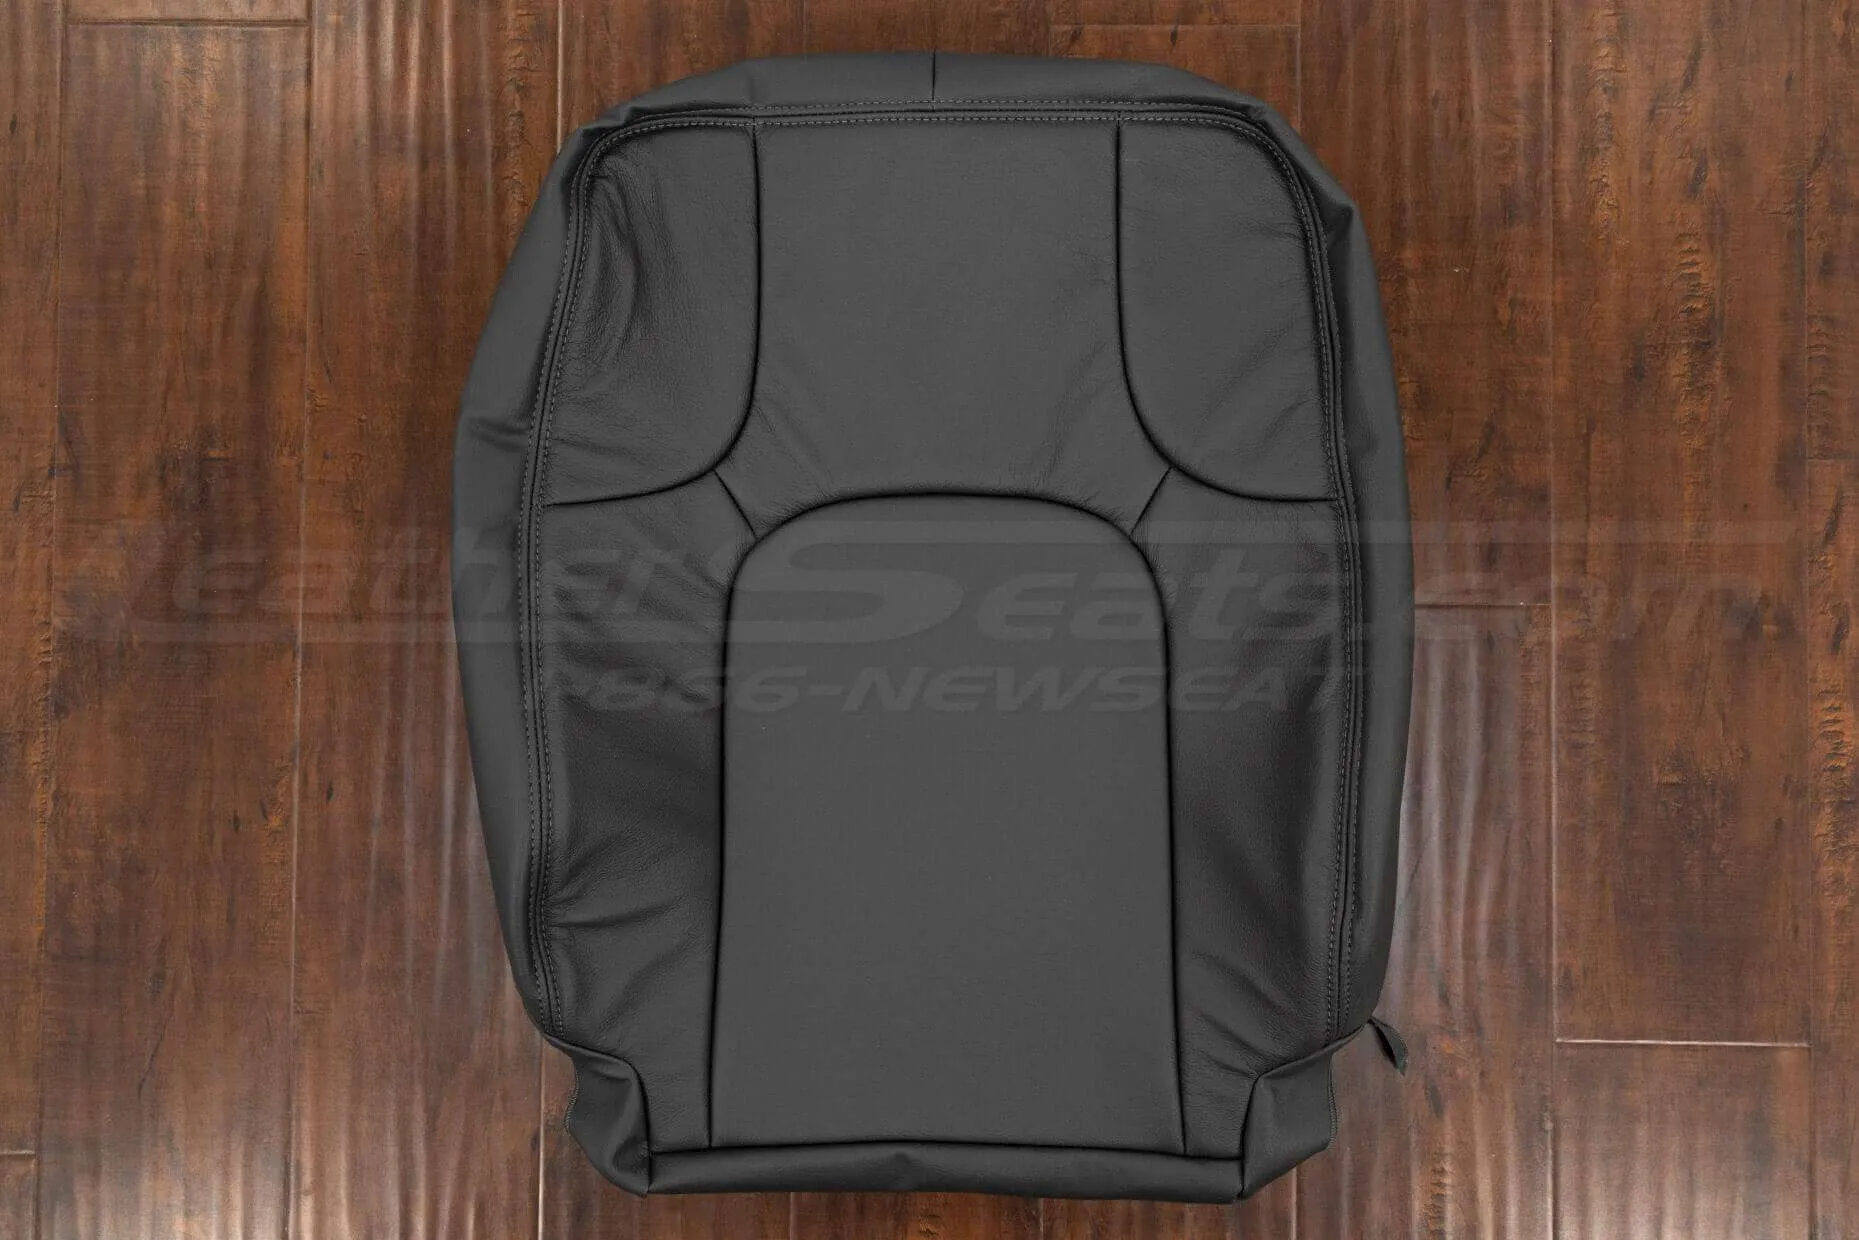 Nissan Frontier front backrest upholstery